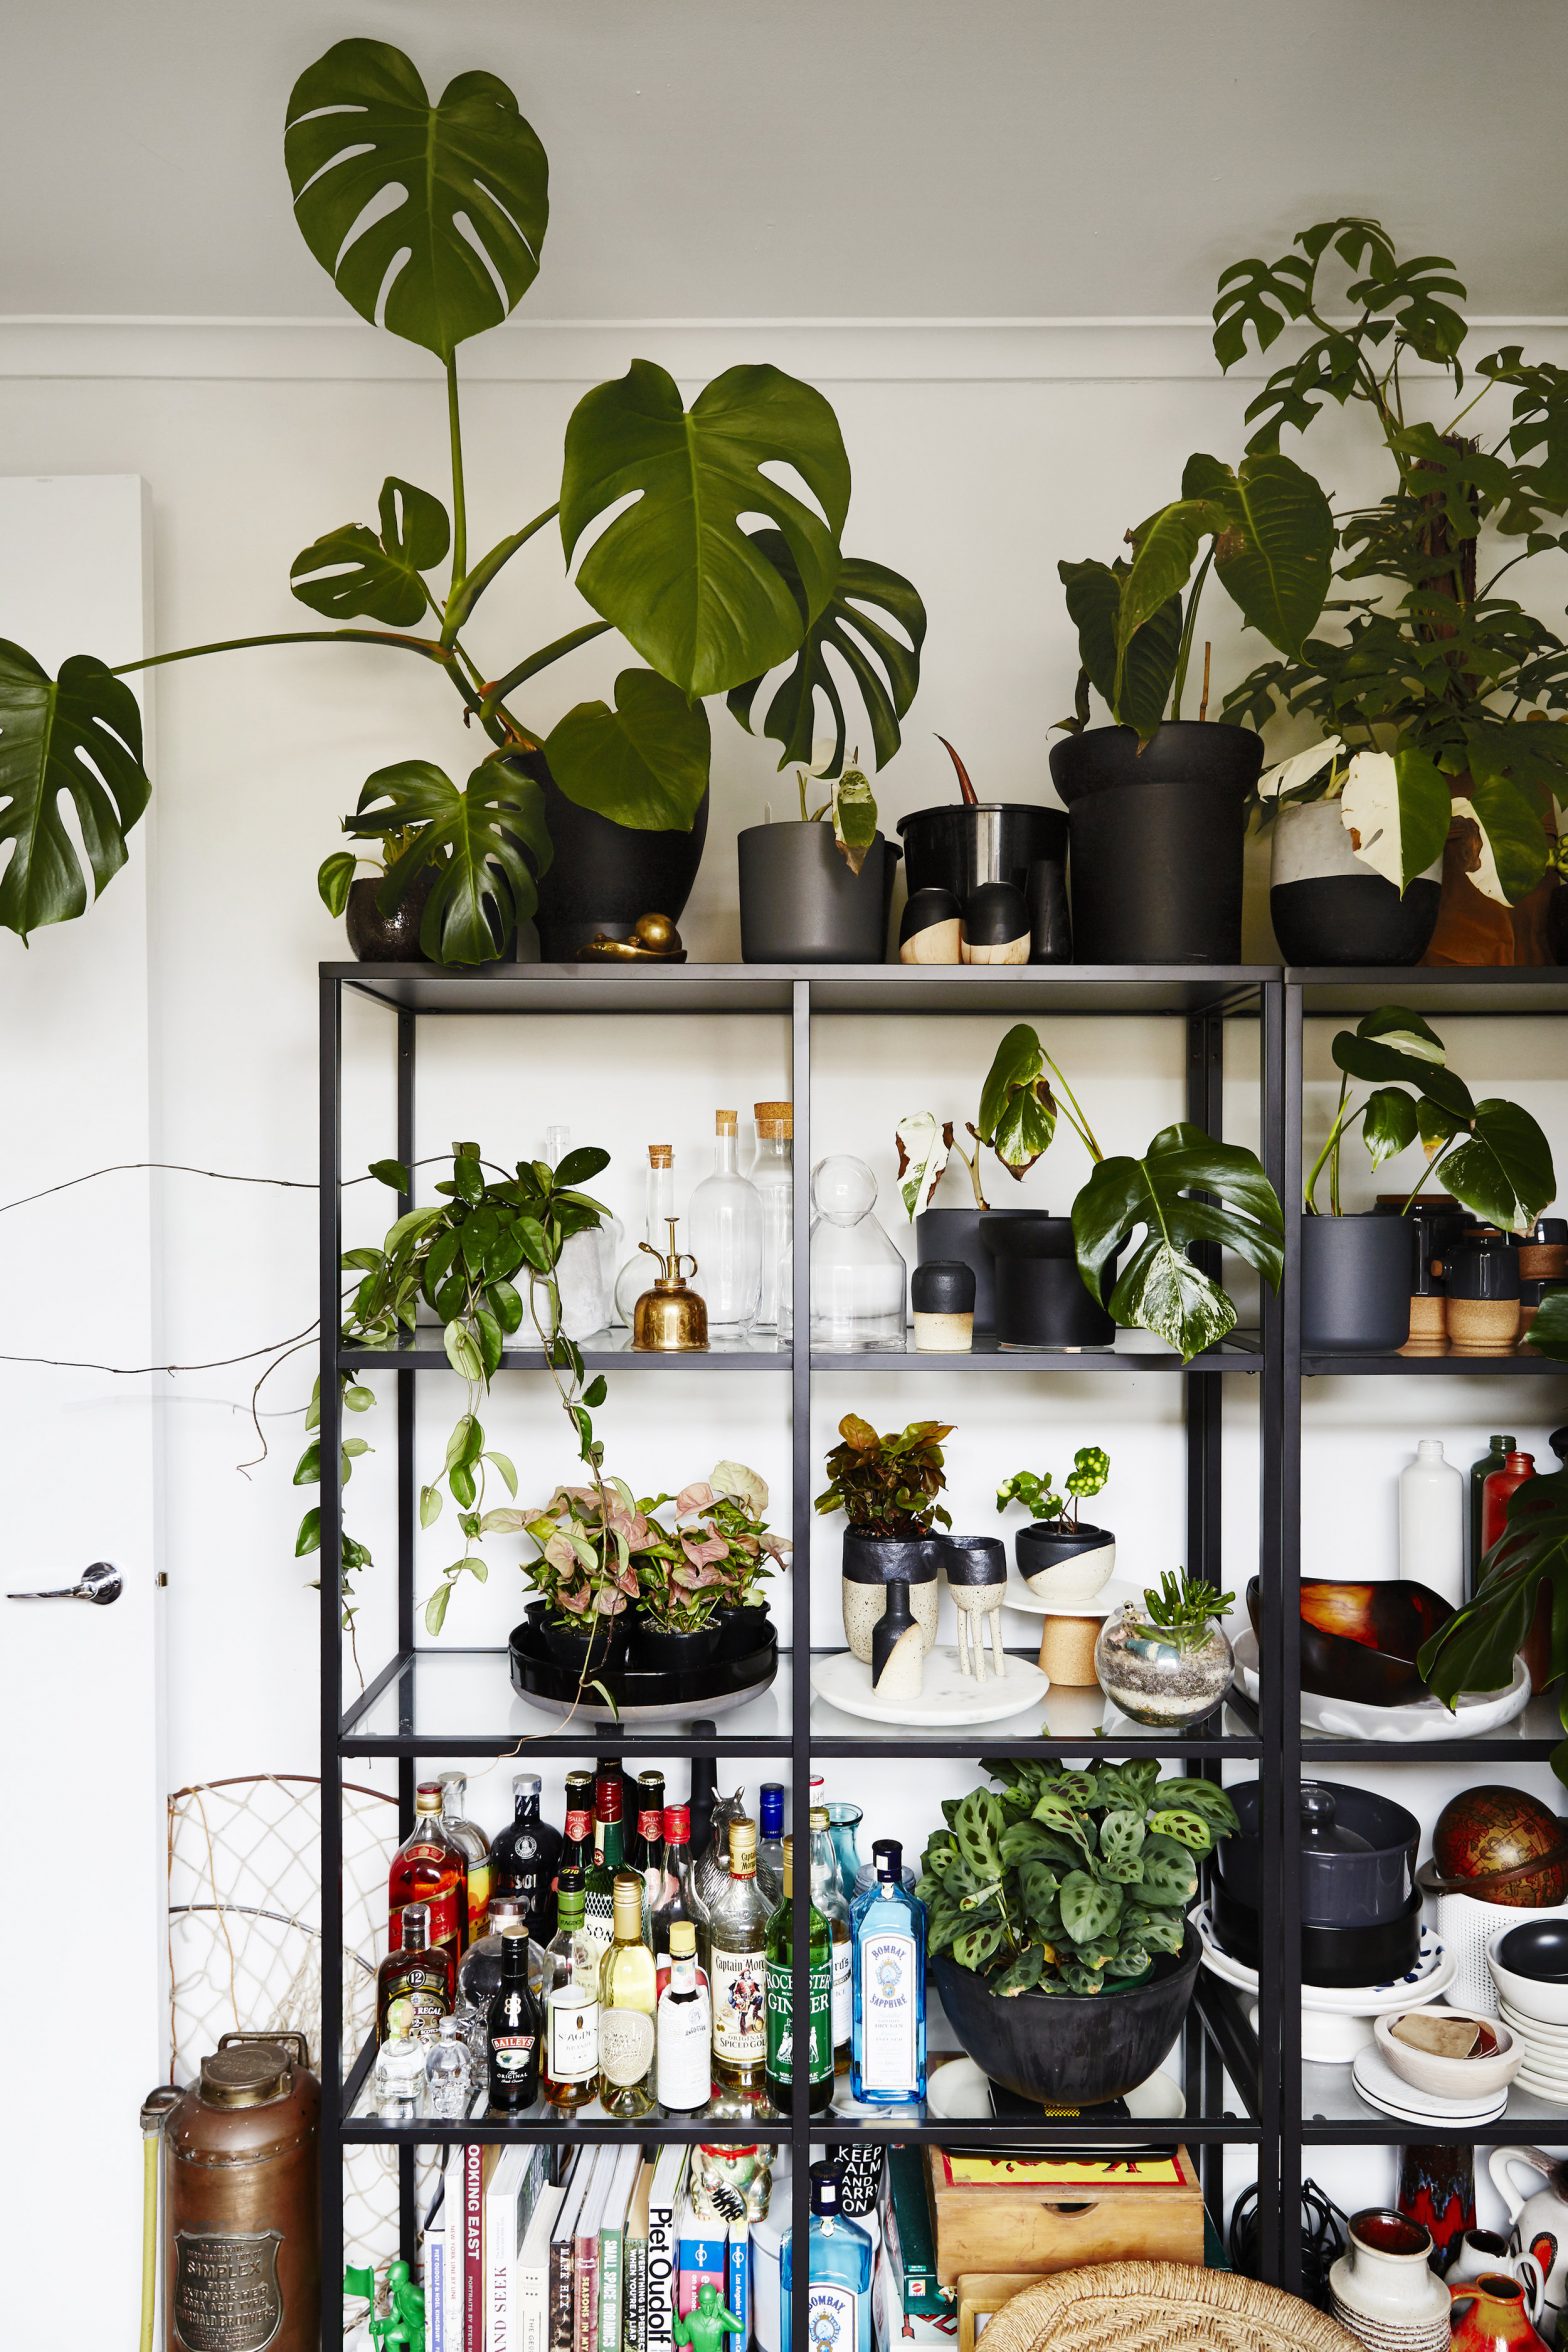 Shelves lines with plants